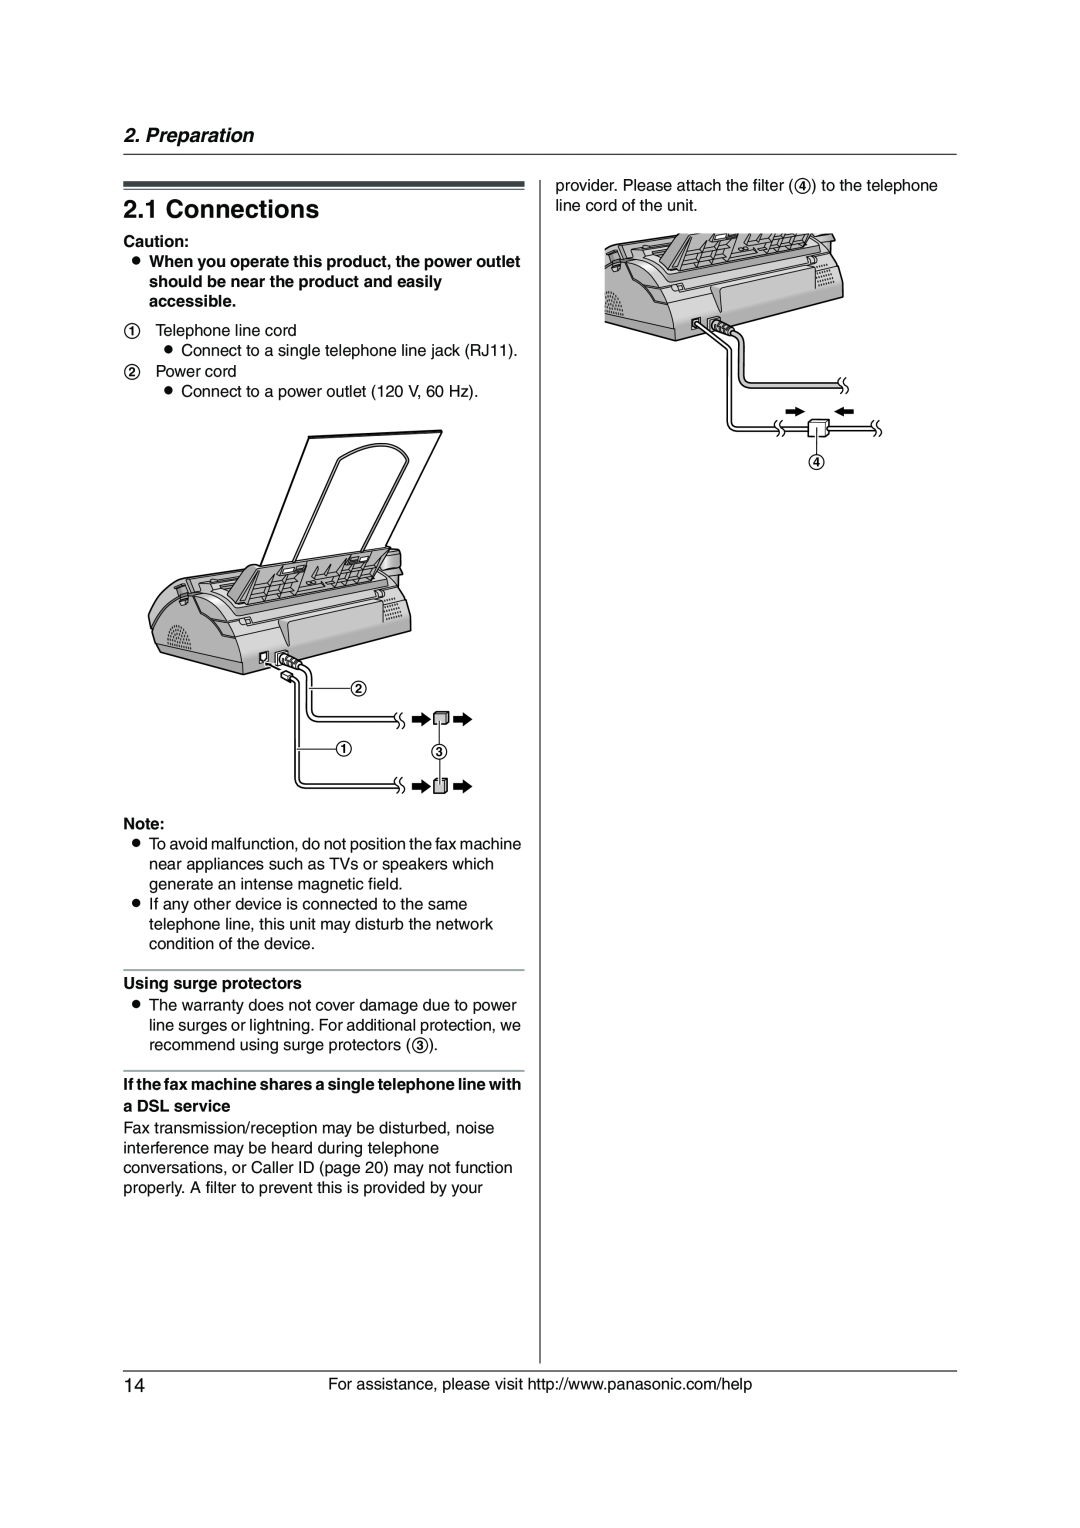 Panasonic KX-FP215 operating instructions Connections, Preparation 